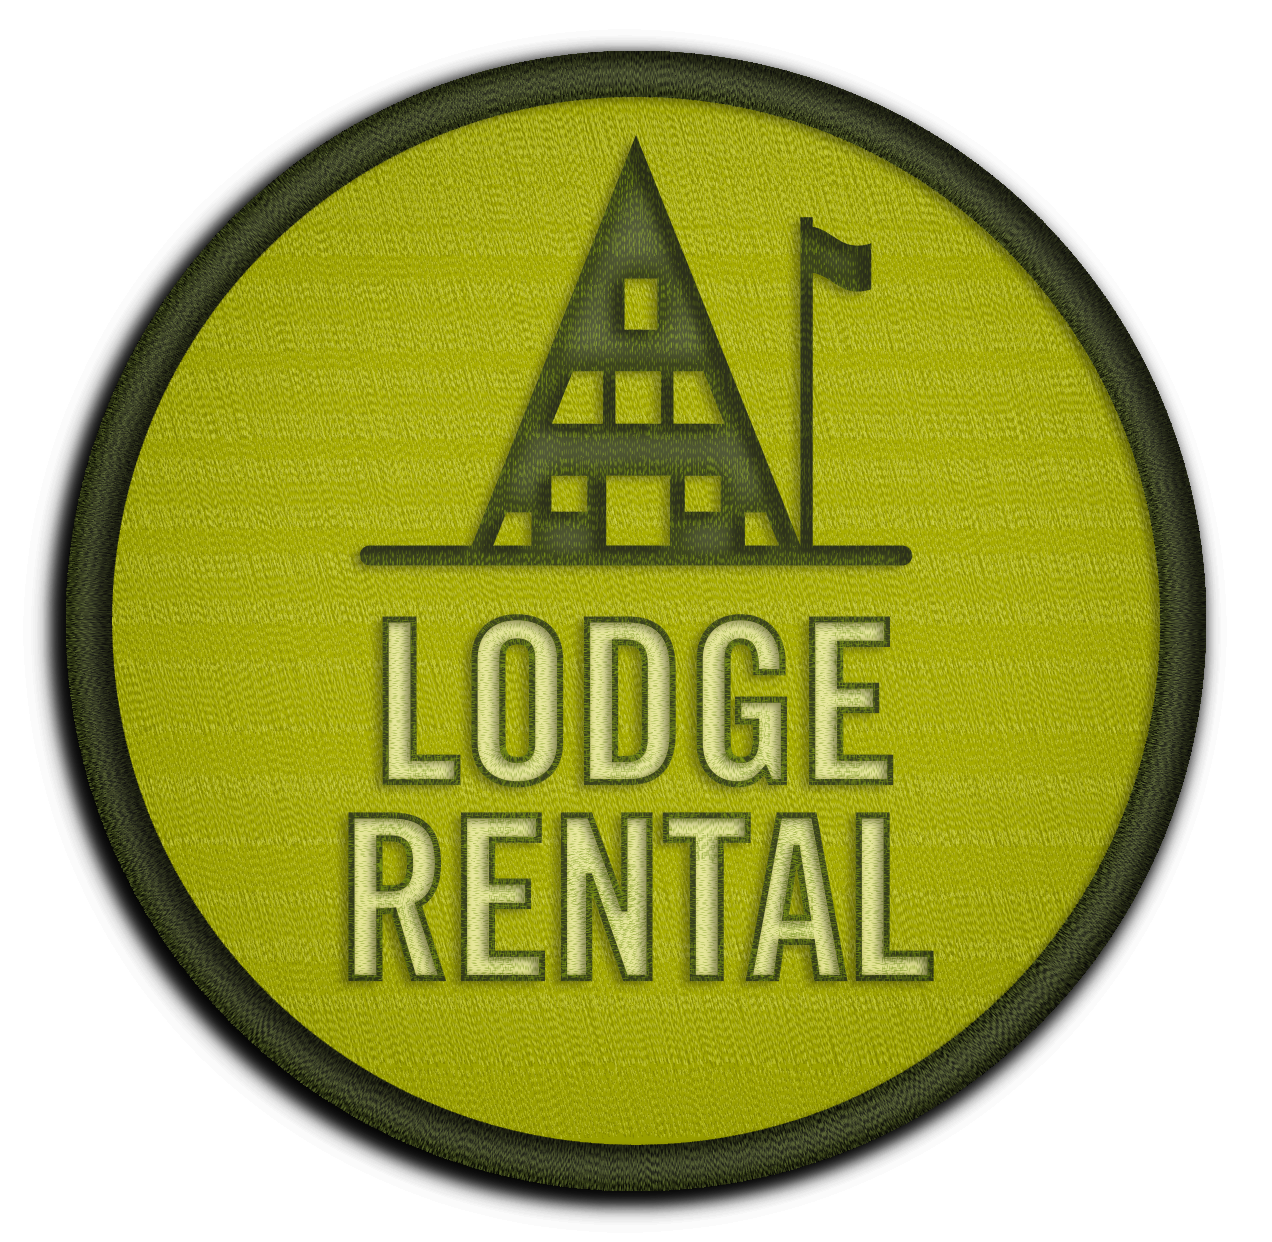 PATCHES_LODGE_RENTAL.png